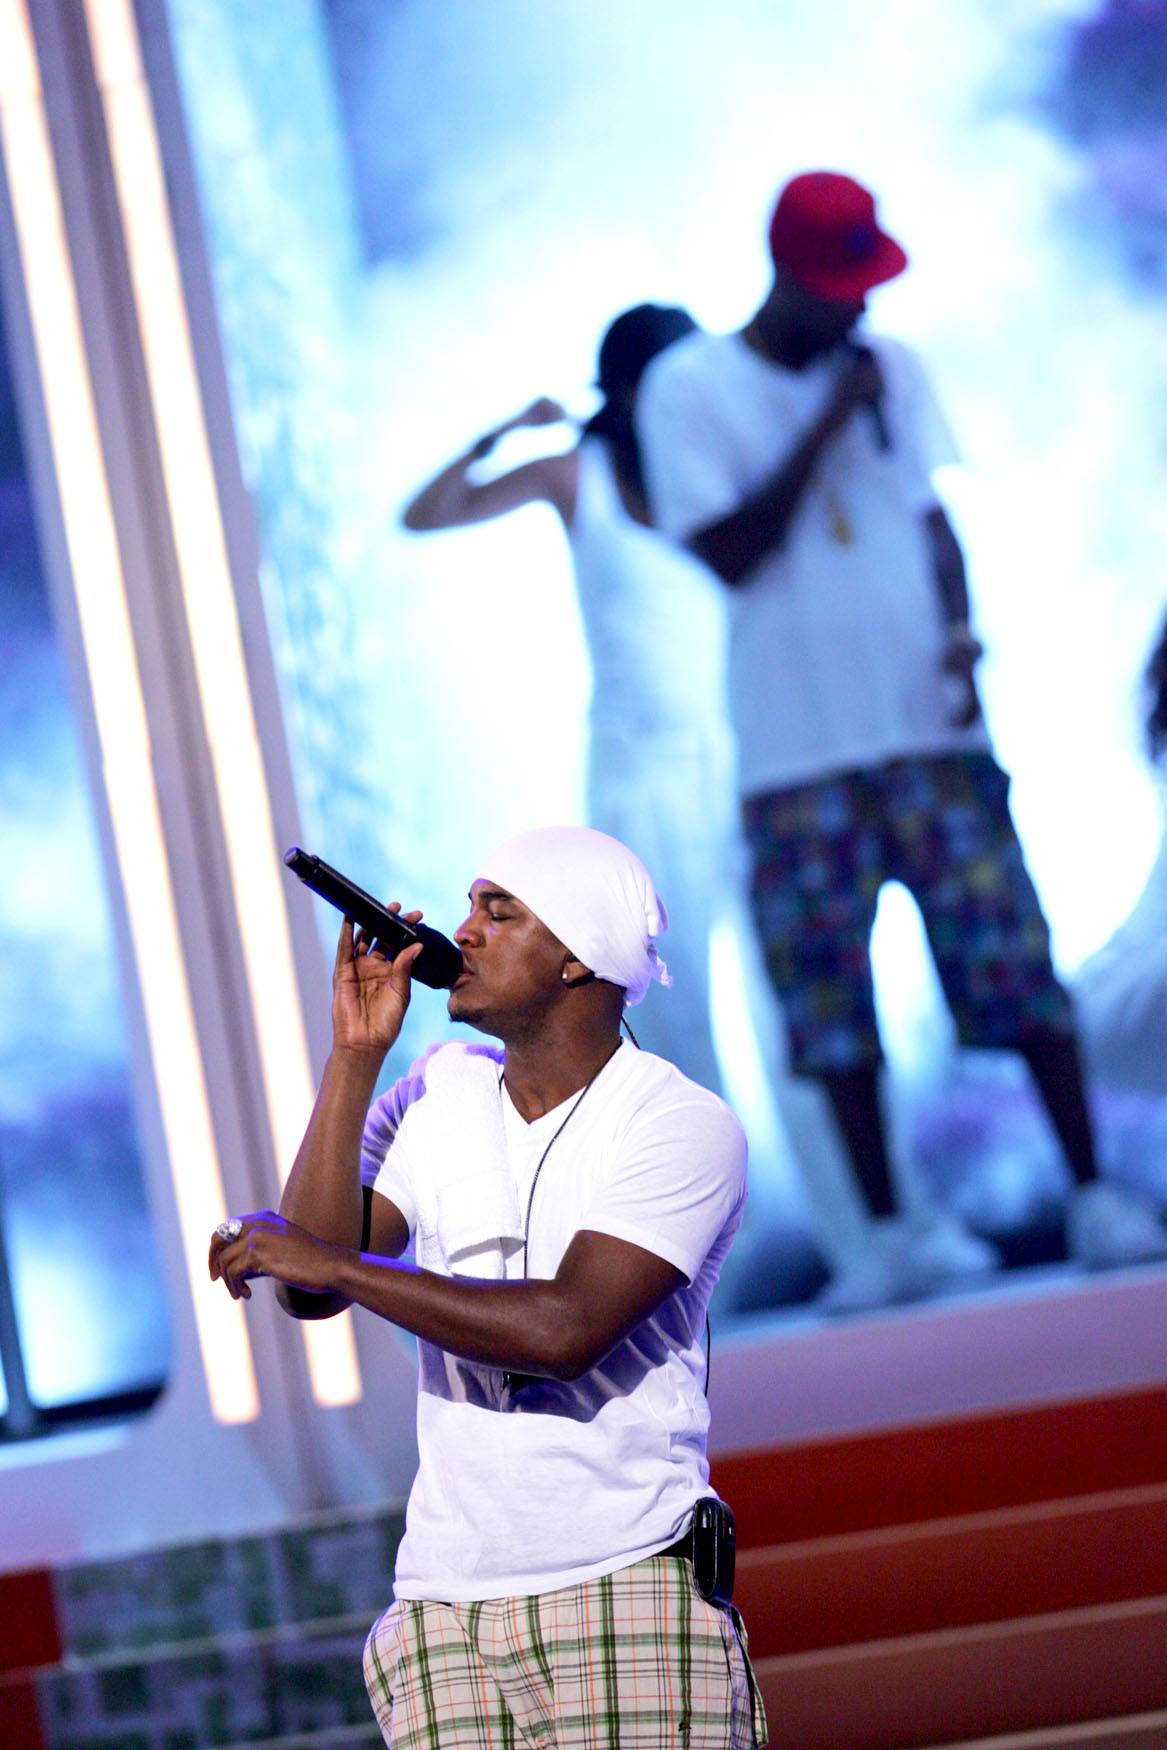 Fabolous and NeYo Image 5 from 2007 BET Awards Performances and